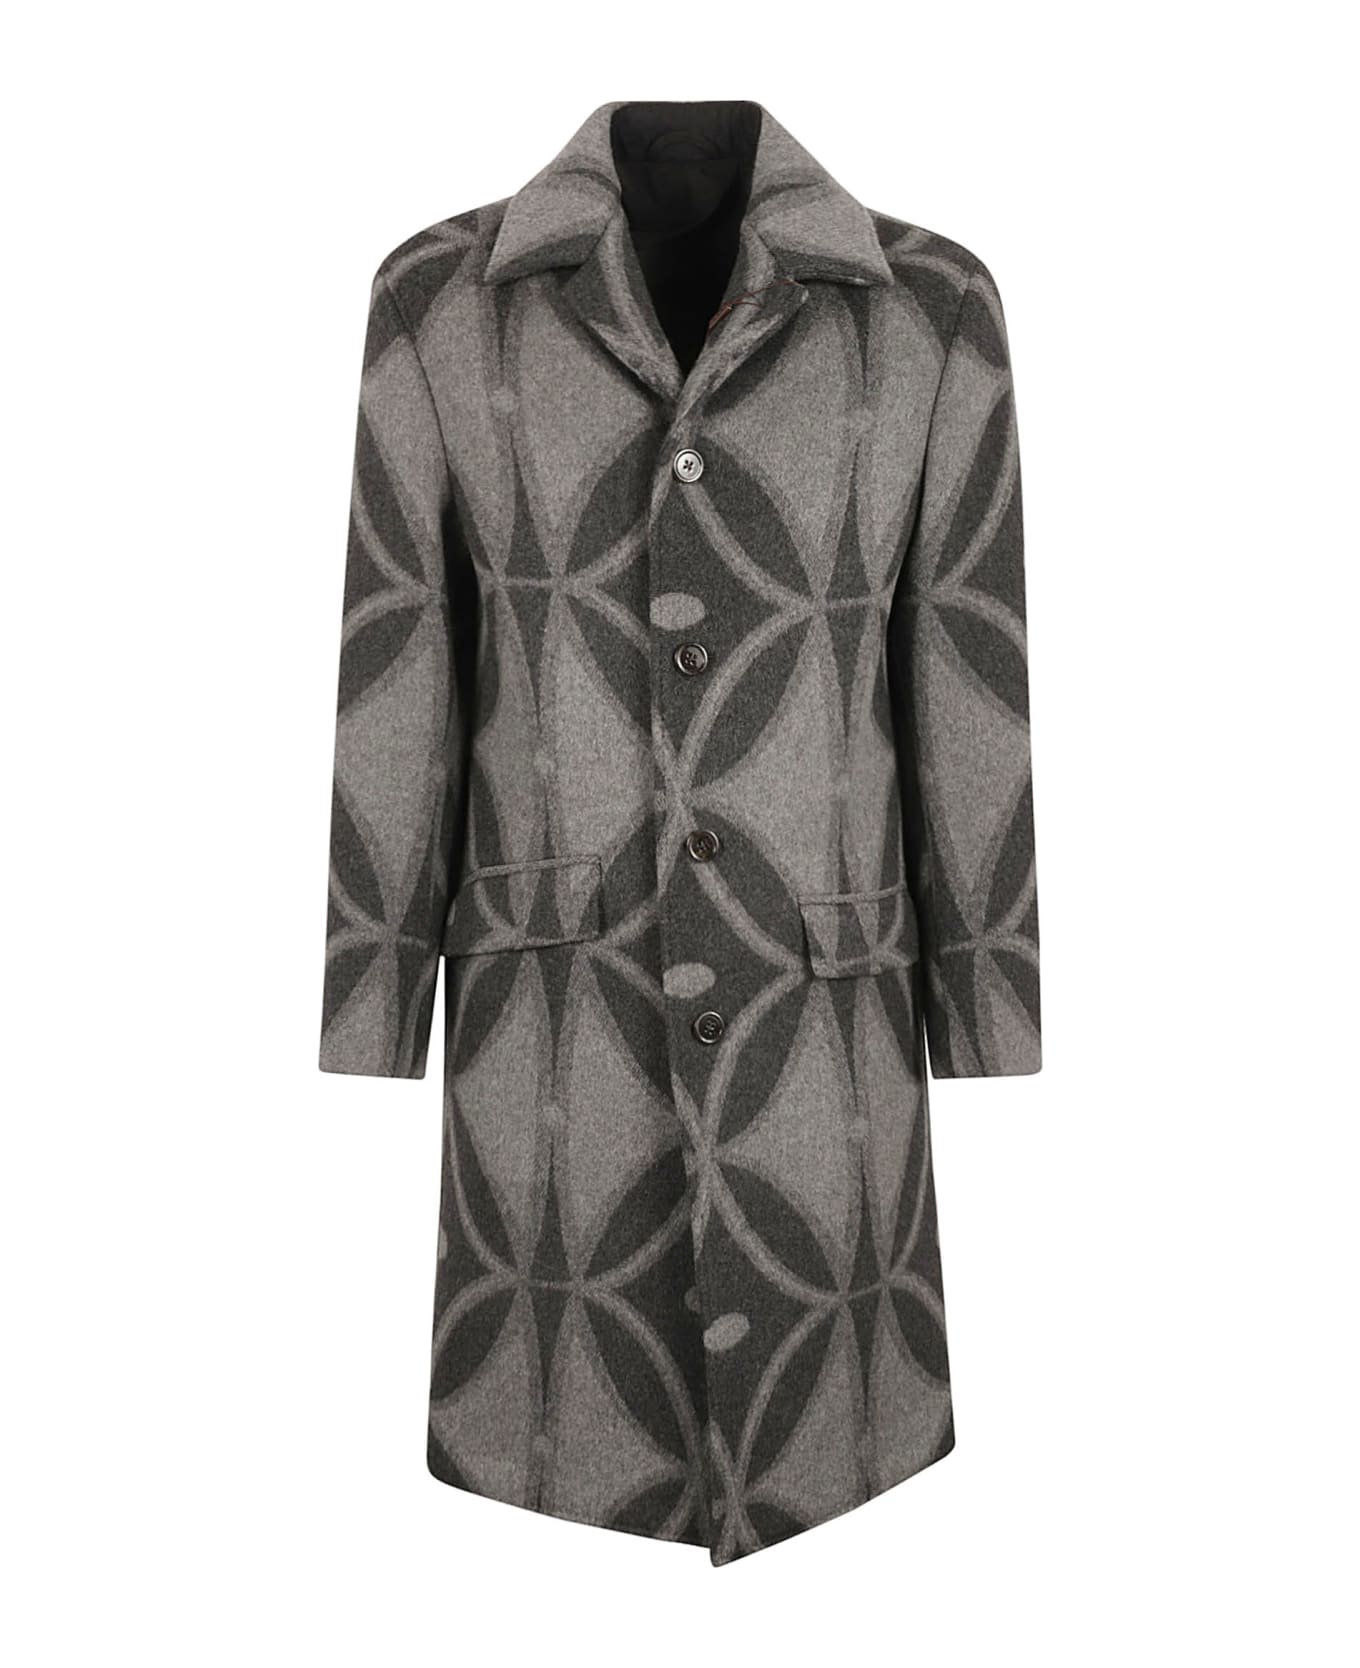 Etro Patterned Button-up Coat - Gray コート